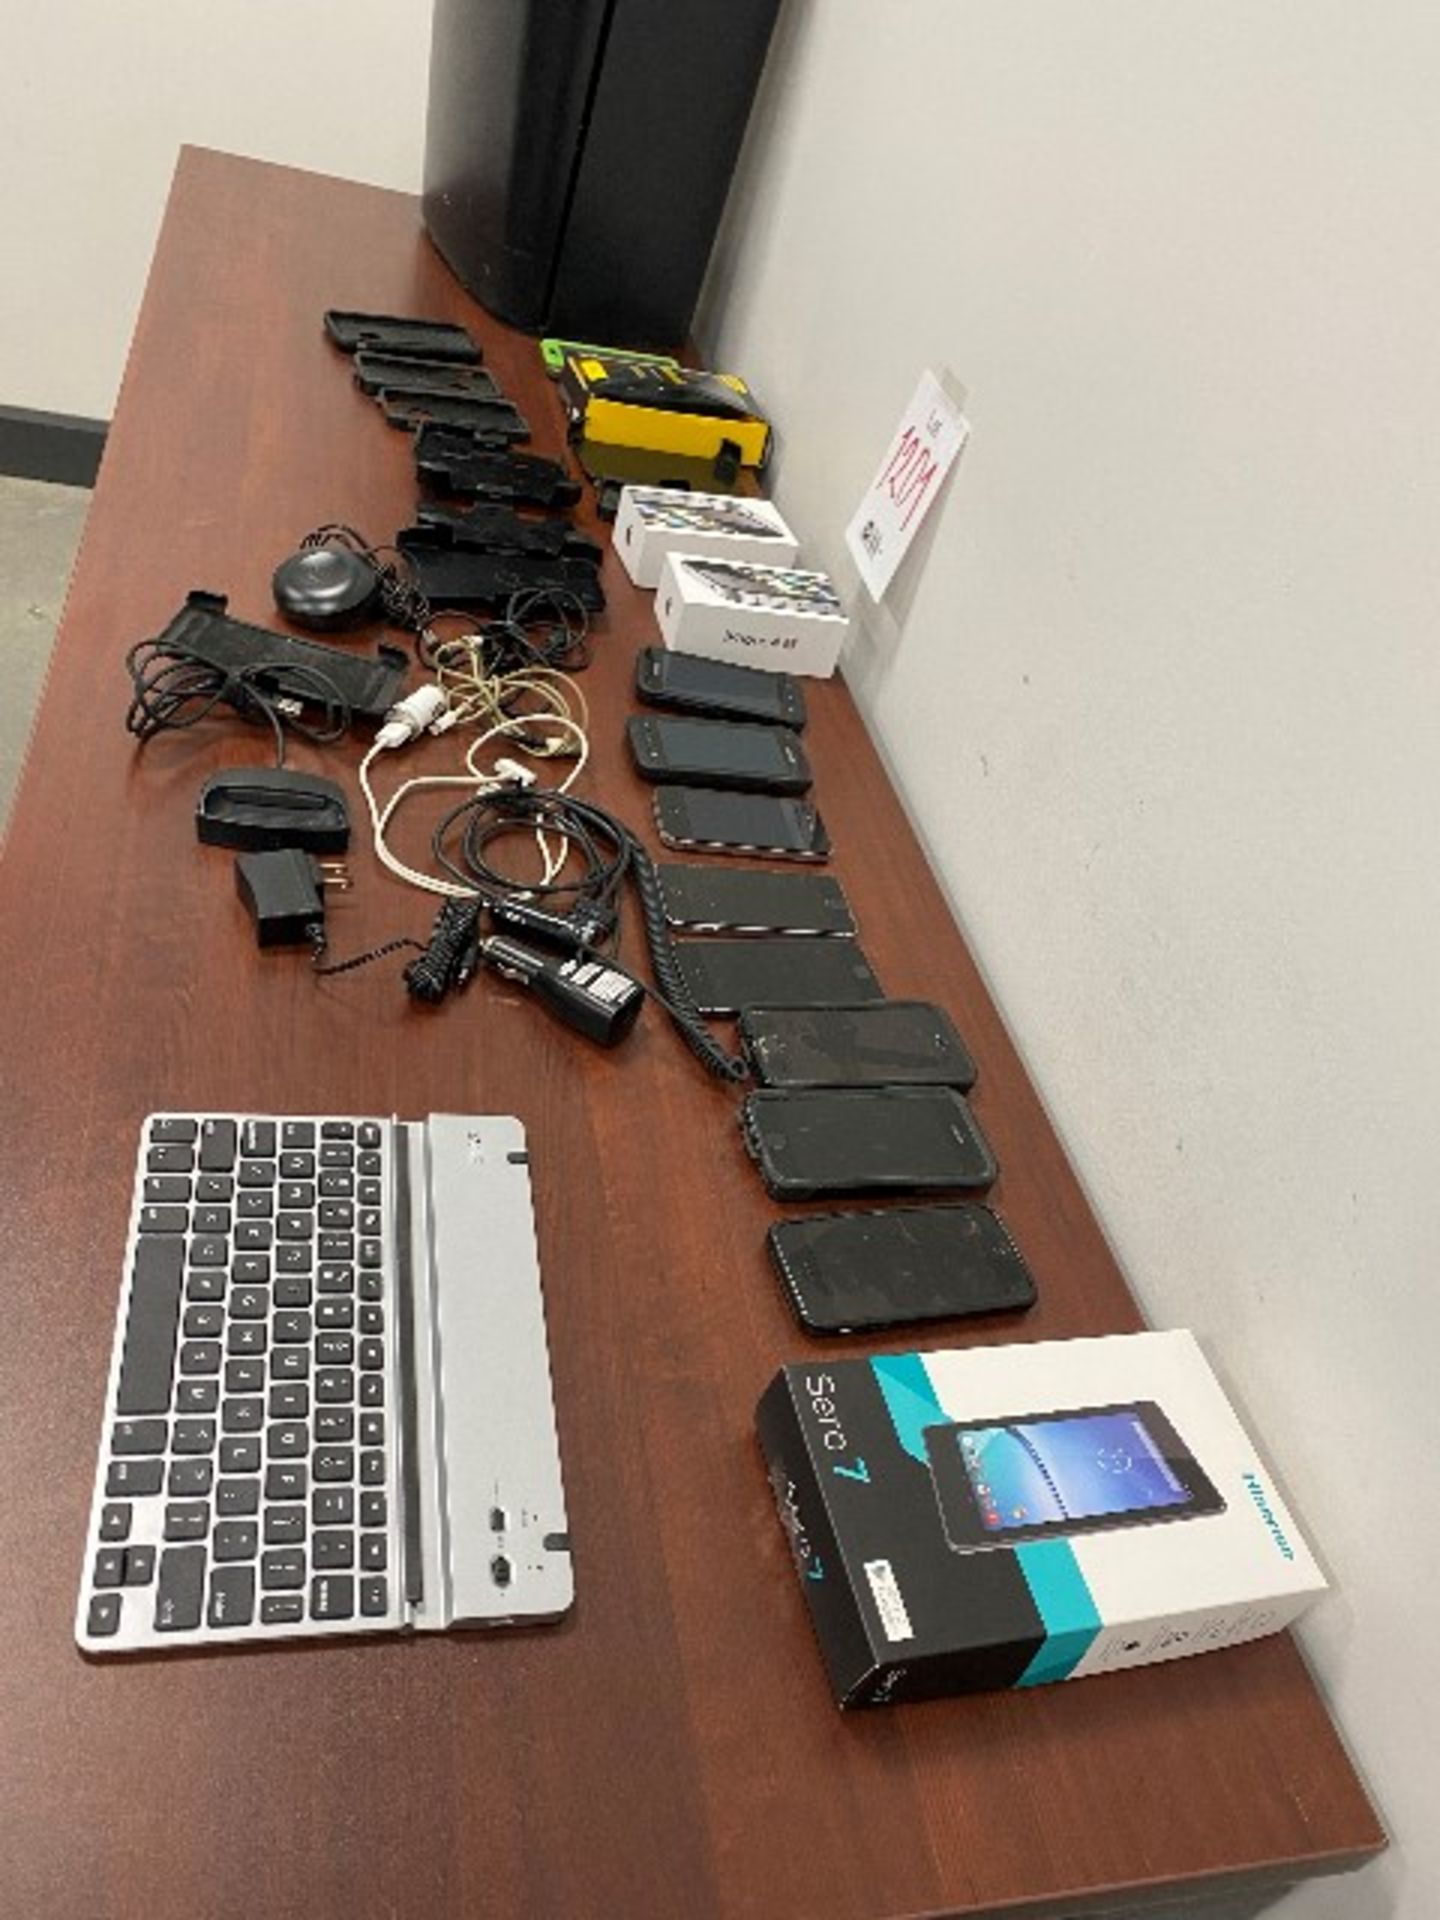 LOT, Assorted cell phones, staplers, accessories, etc... - Image 2 of 2